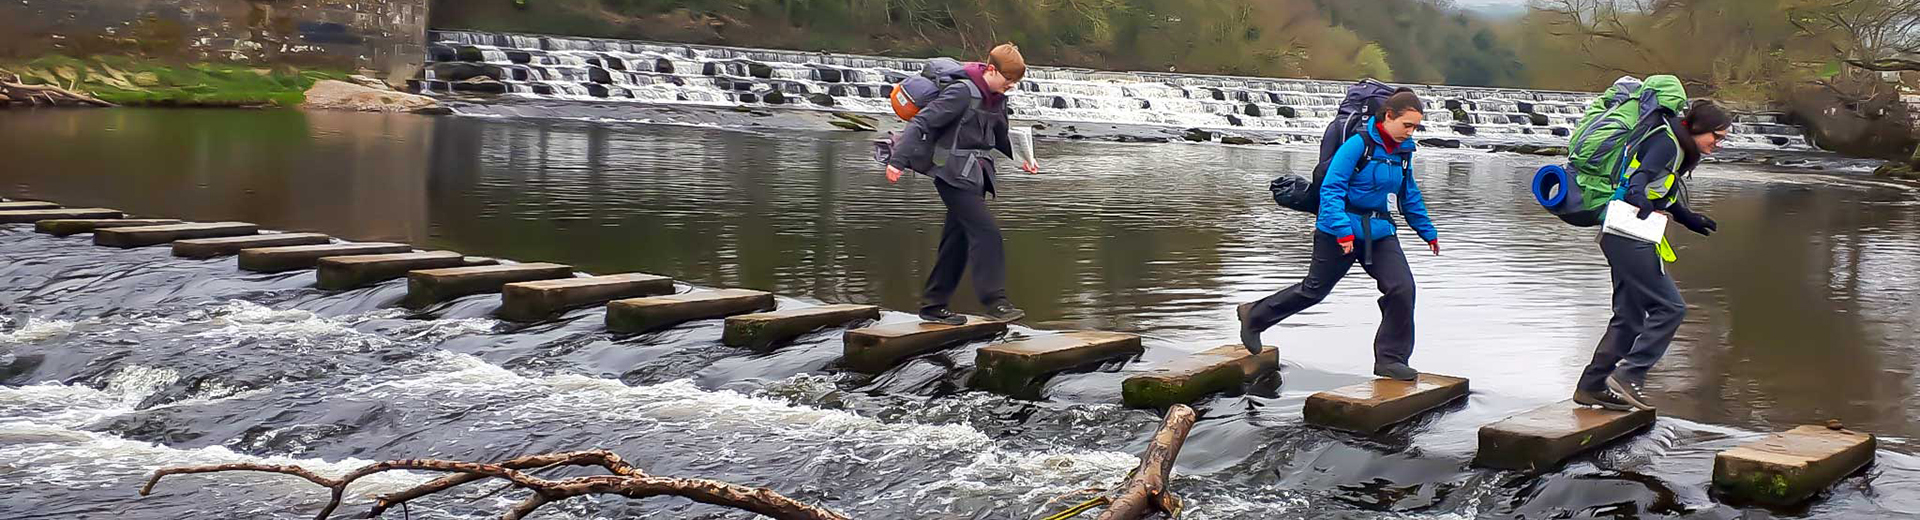 DofE group crossing stepping stones